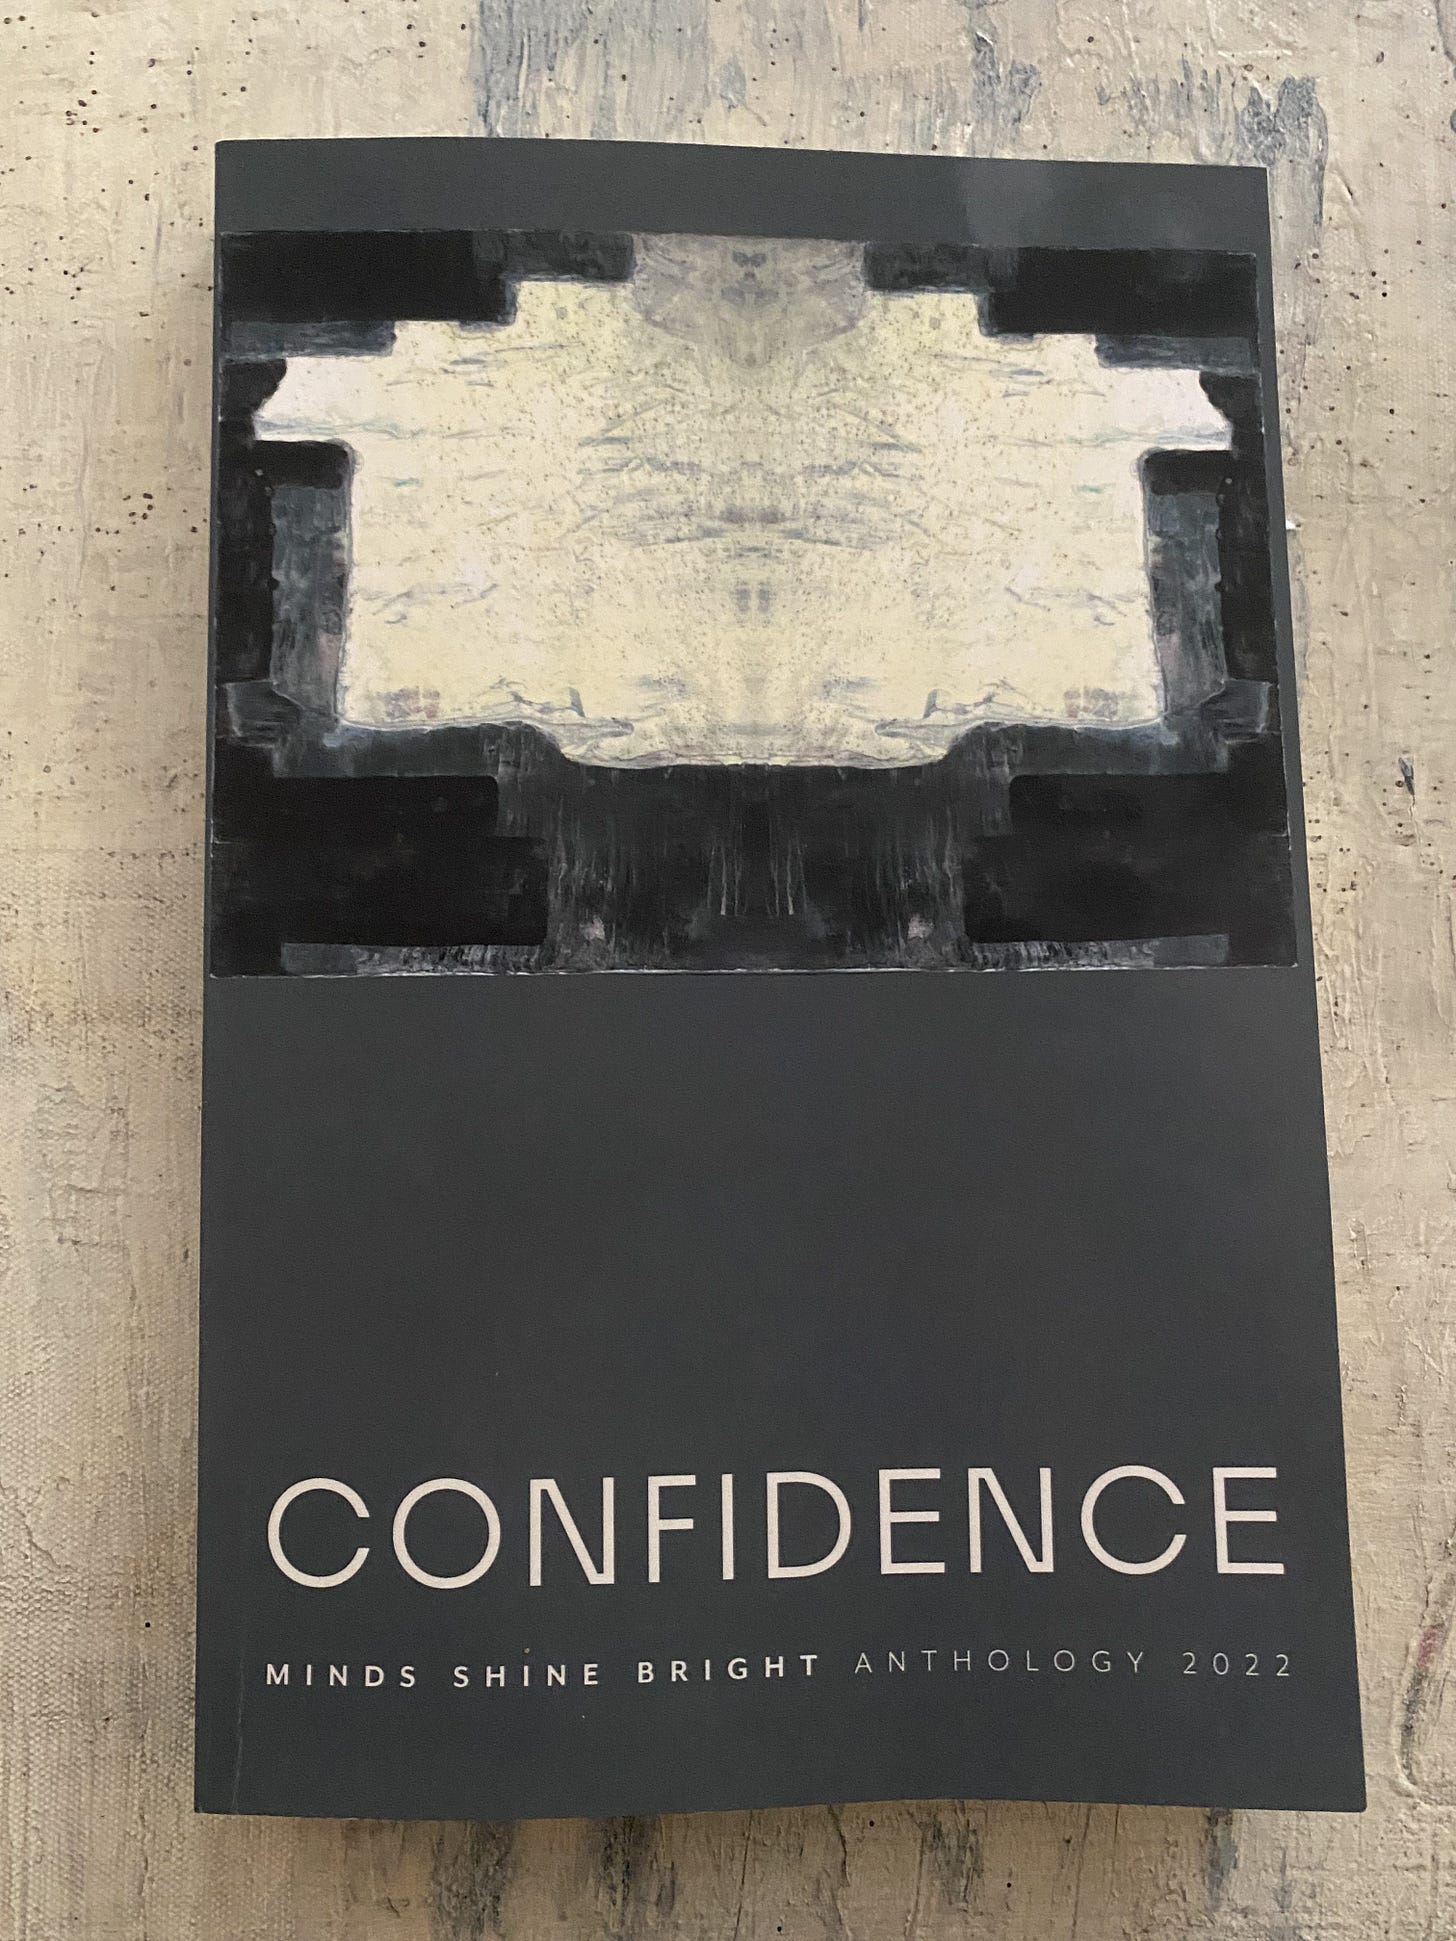 Confidence, Minds Shine Bright’s anthology featuring winning and commended entries from the Minds Shine Bright writing competition Confidence